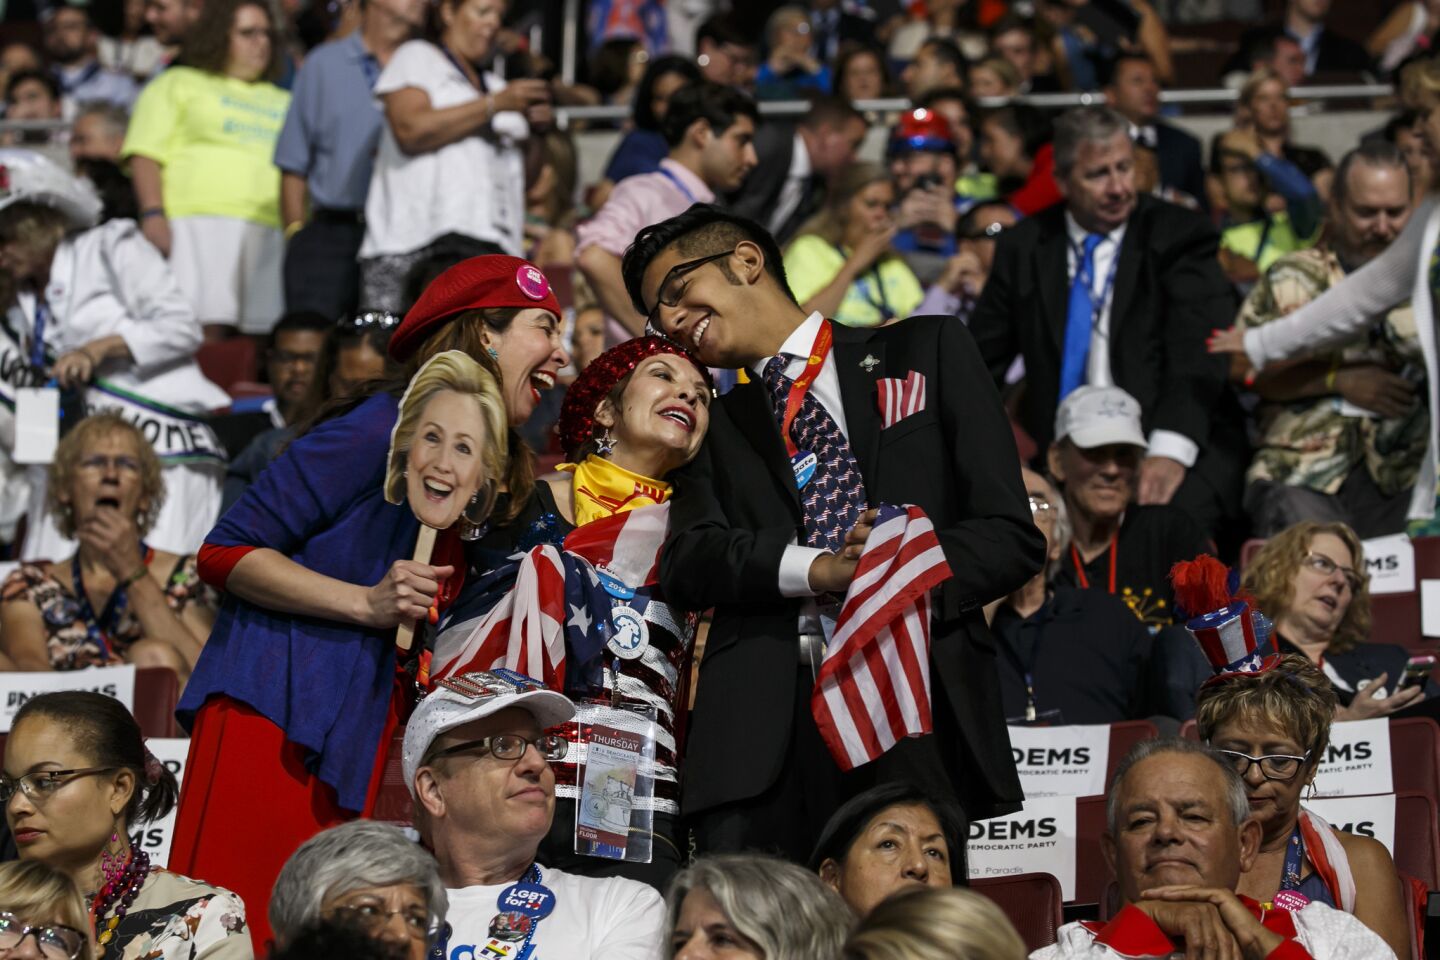 Delegates embrace each other during the 2016 Democratic National Convention in Philadelphia.